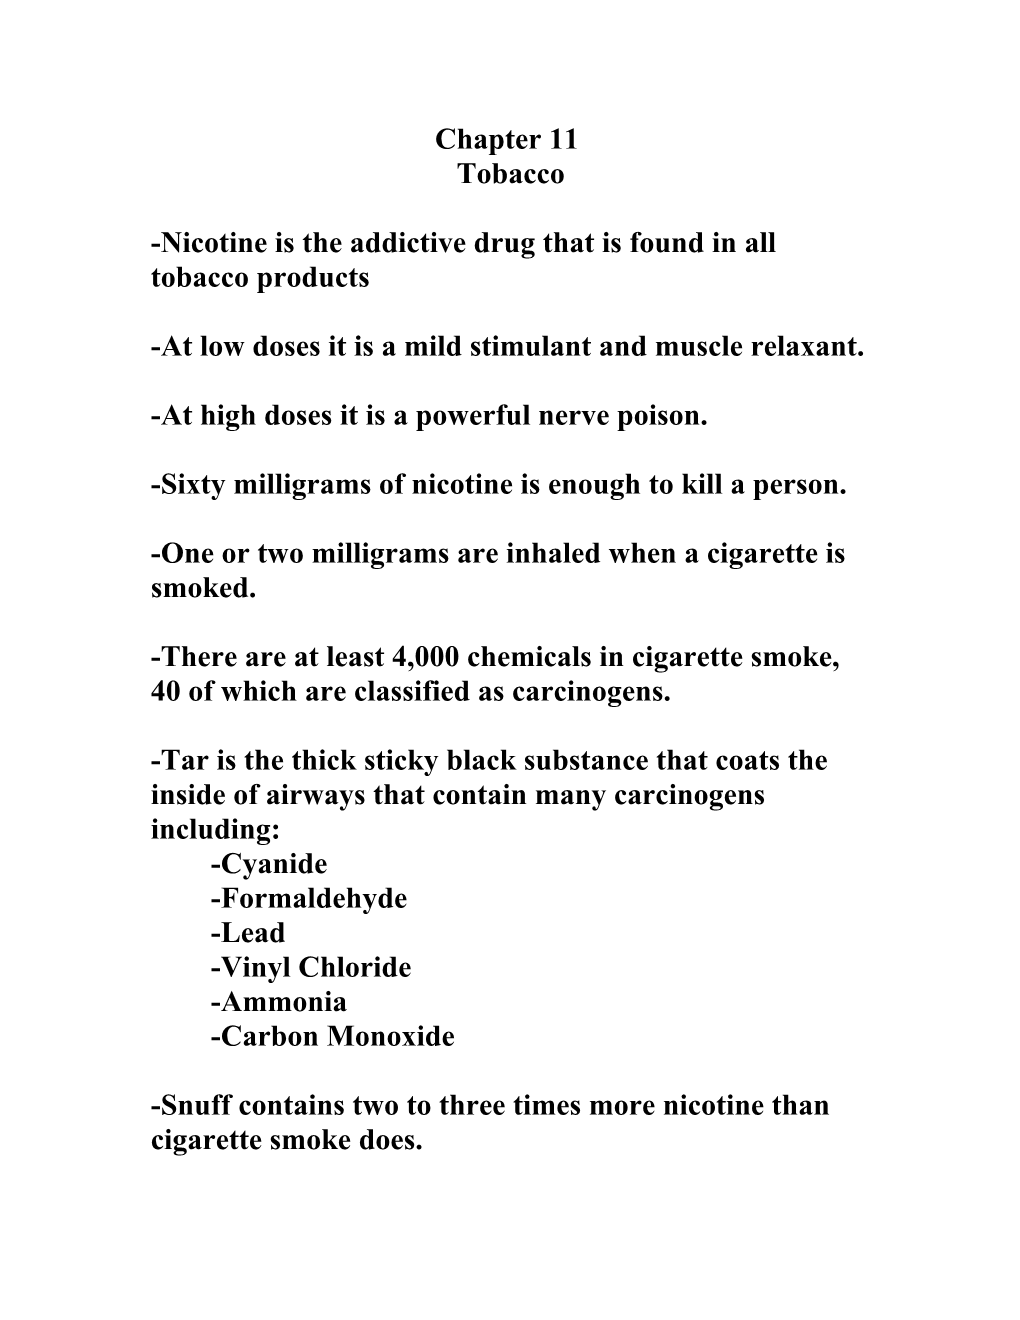 Nicotine Is the Addictive Drug That Is Found in All Tobacco Products